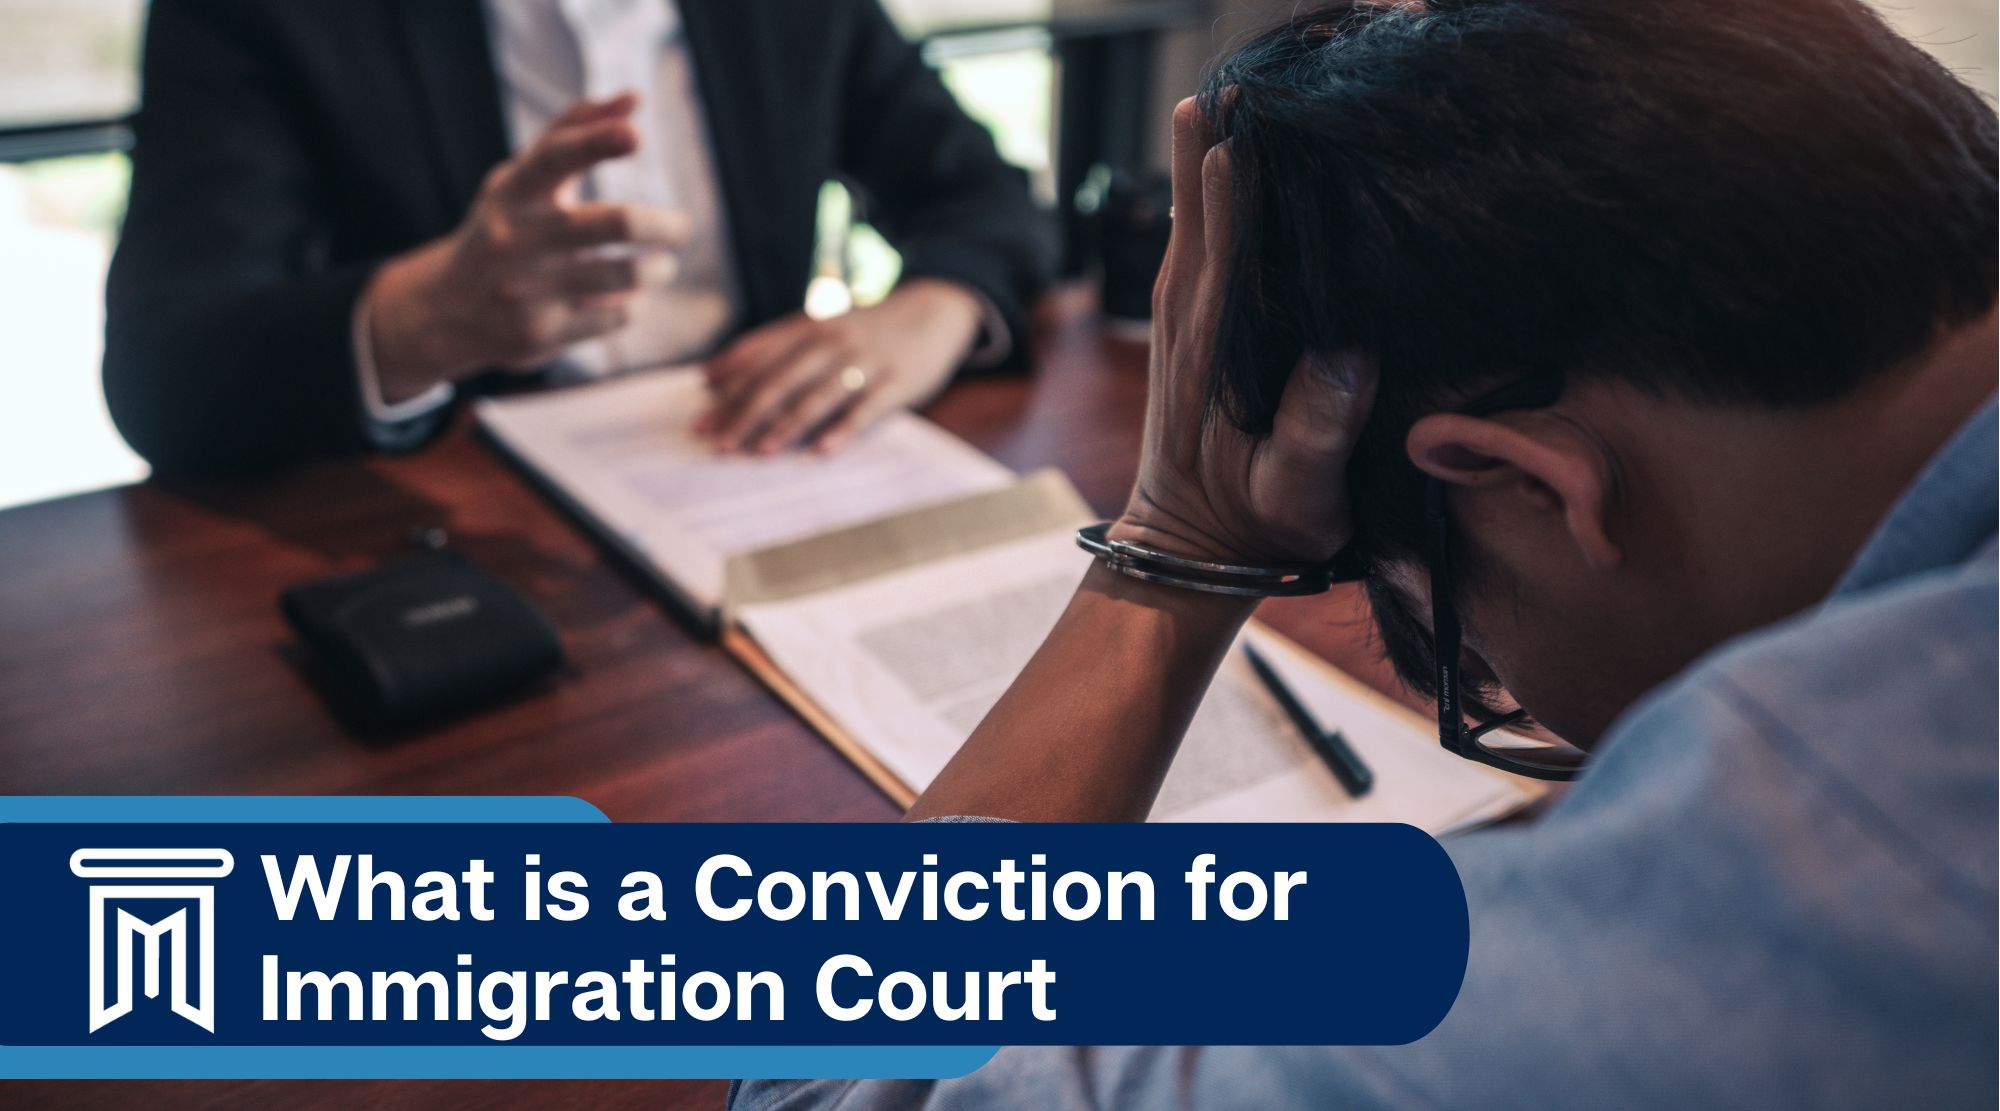 What is a Conviction for Immigration Court